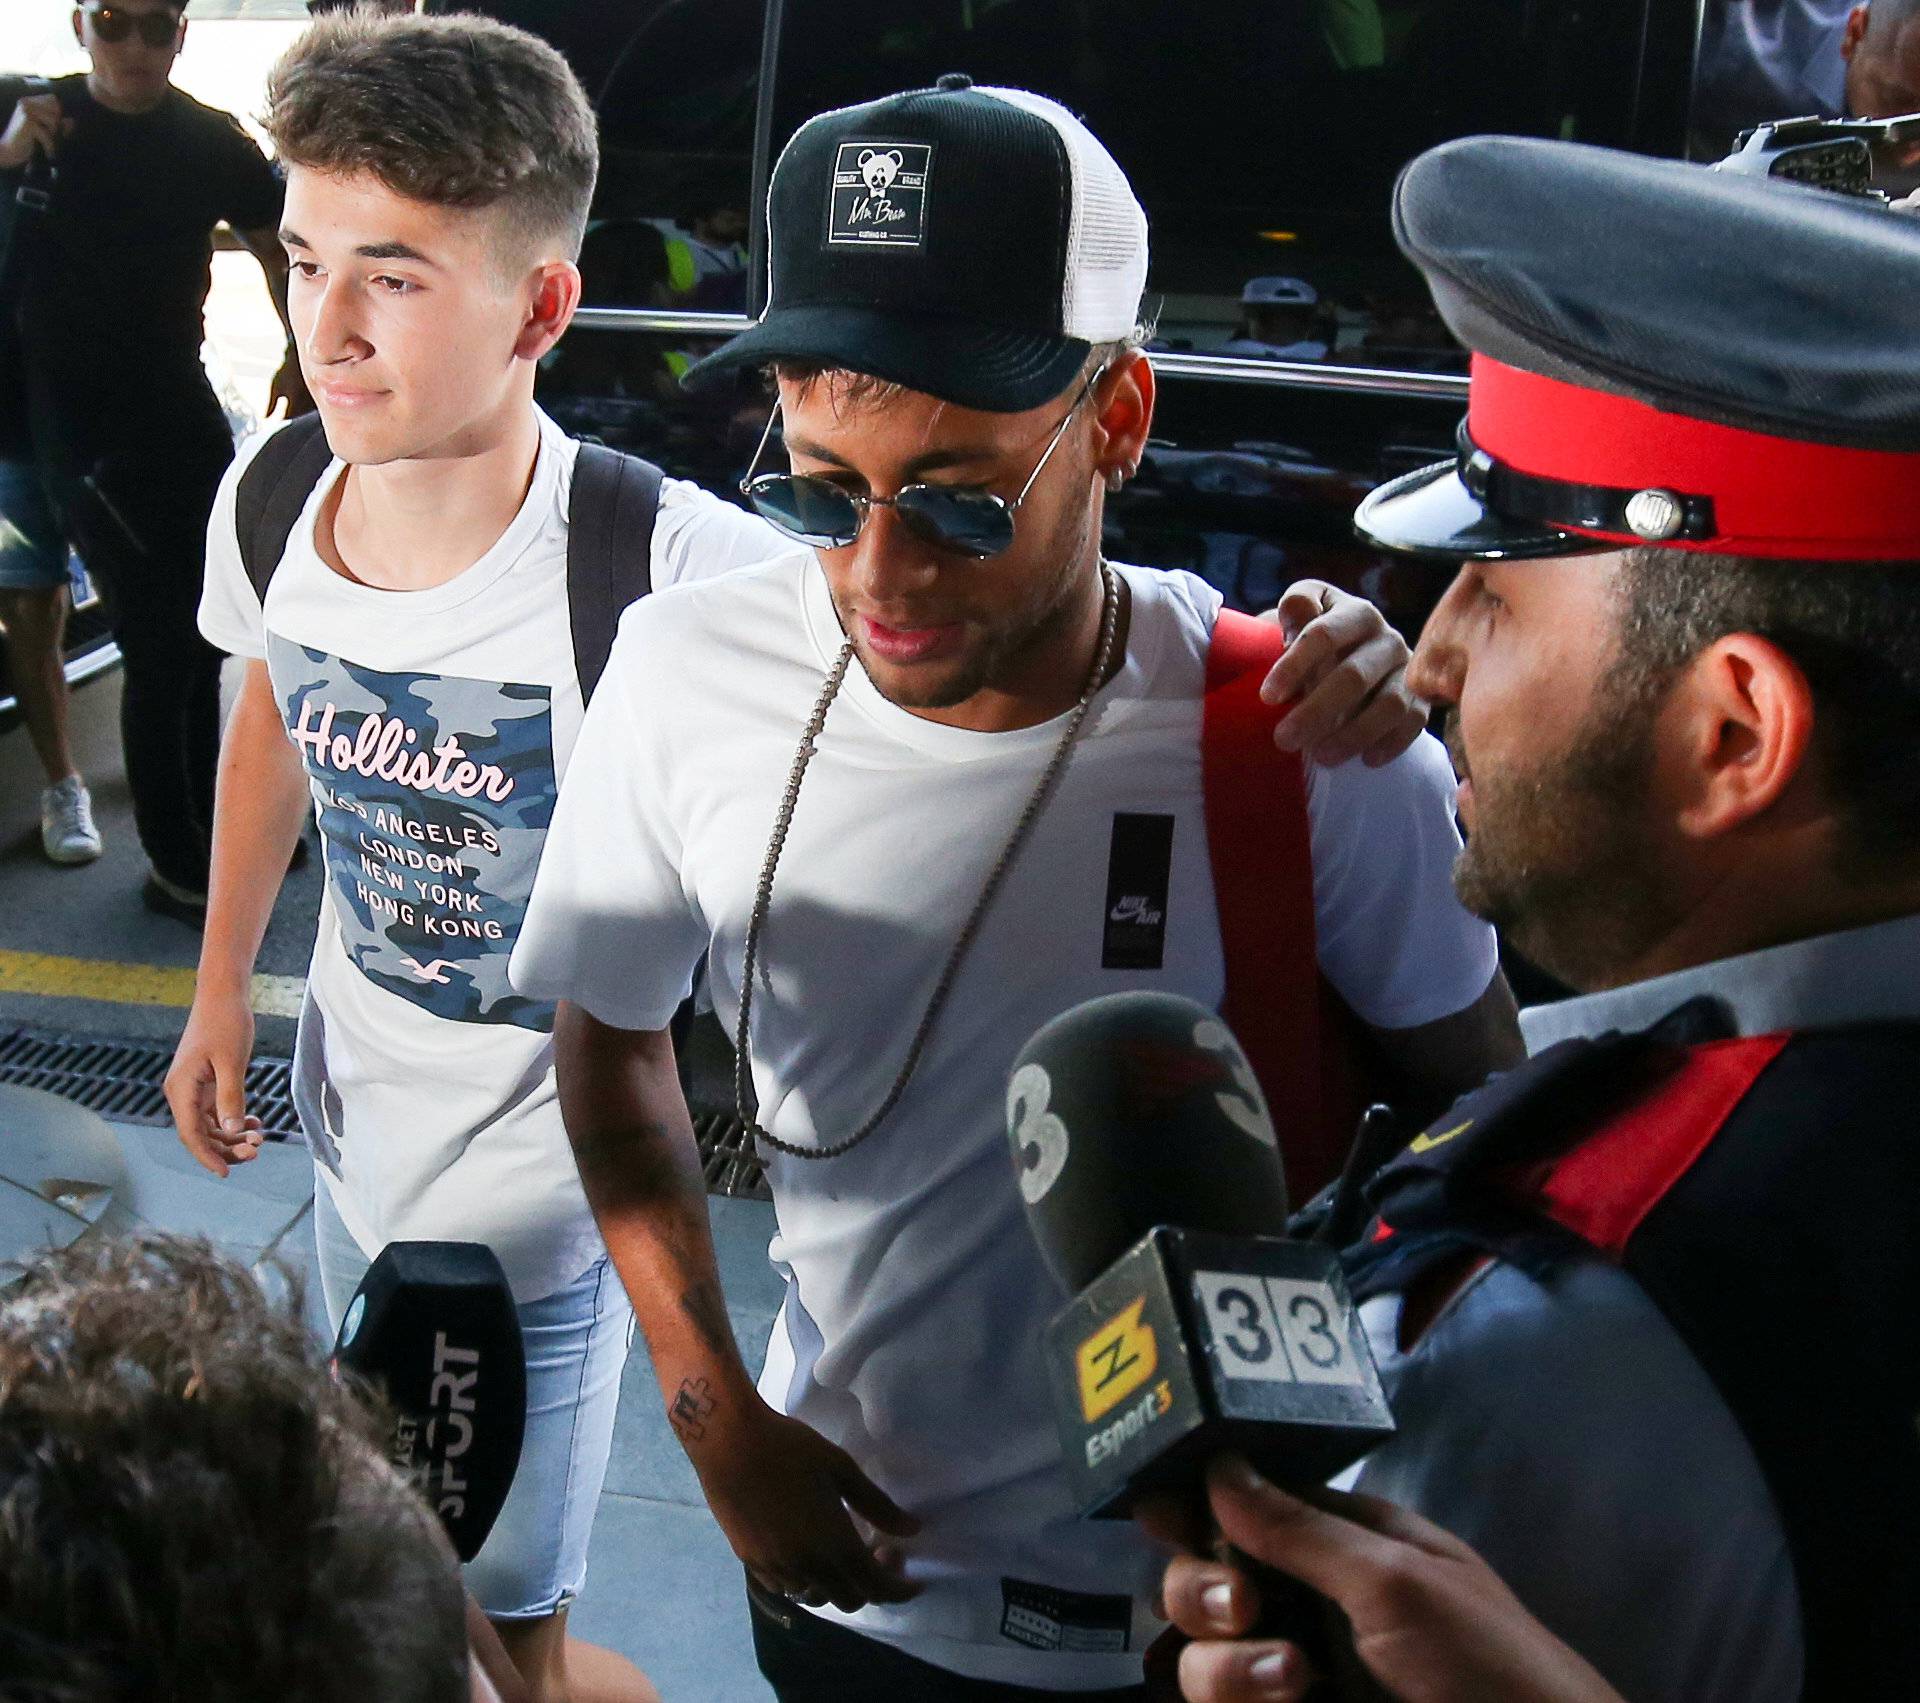 Brazilian soccer player Neymar walks in to a departure terminal at the airport in Barcelona